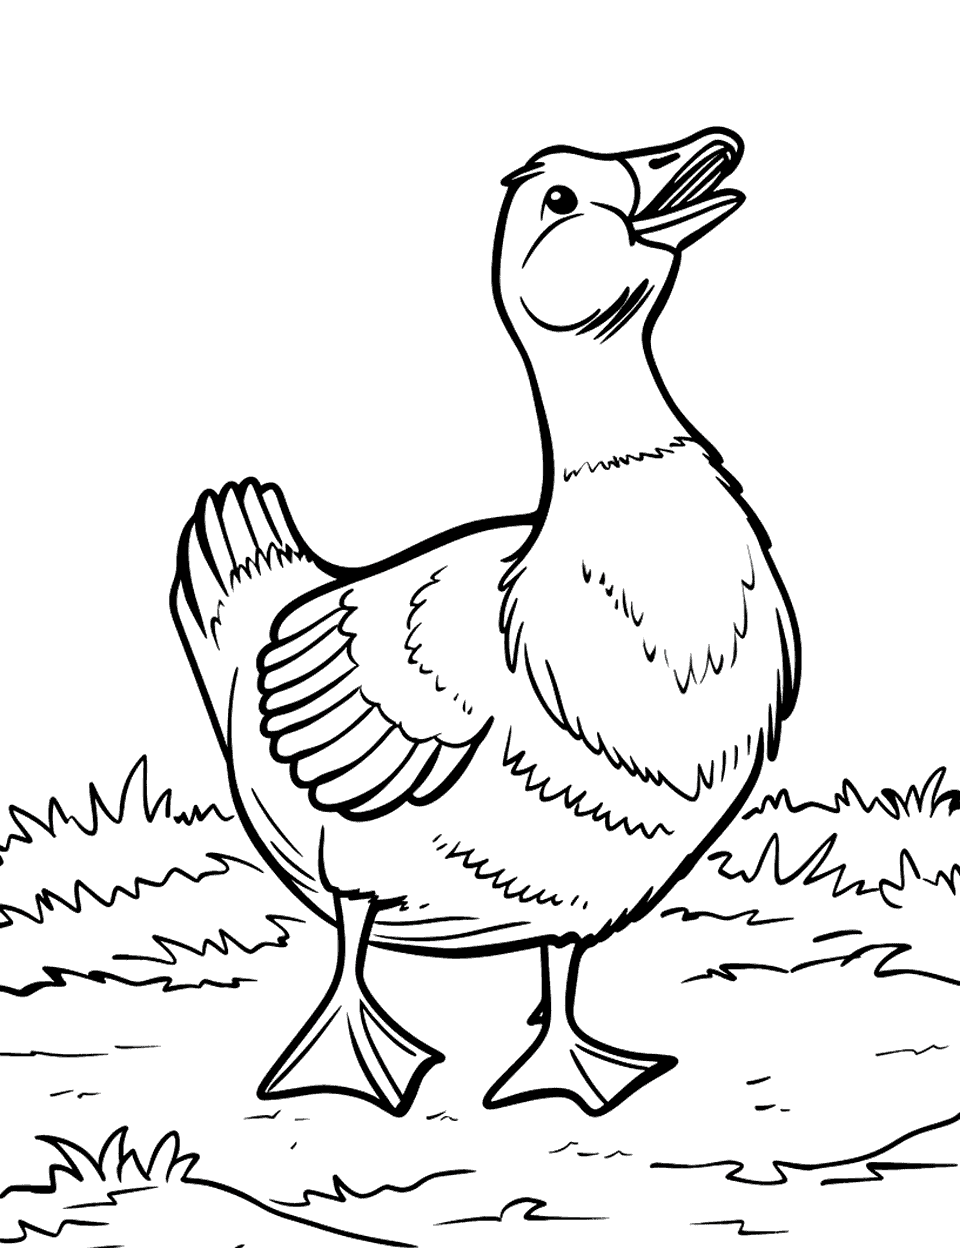 Goose Honking Loudly Farm Animal Coloring Page - A goose with its beak open, honking loudly to alert its flock.